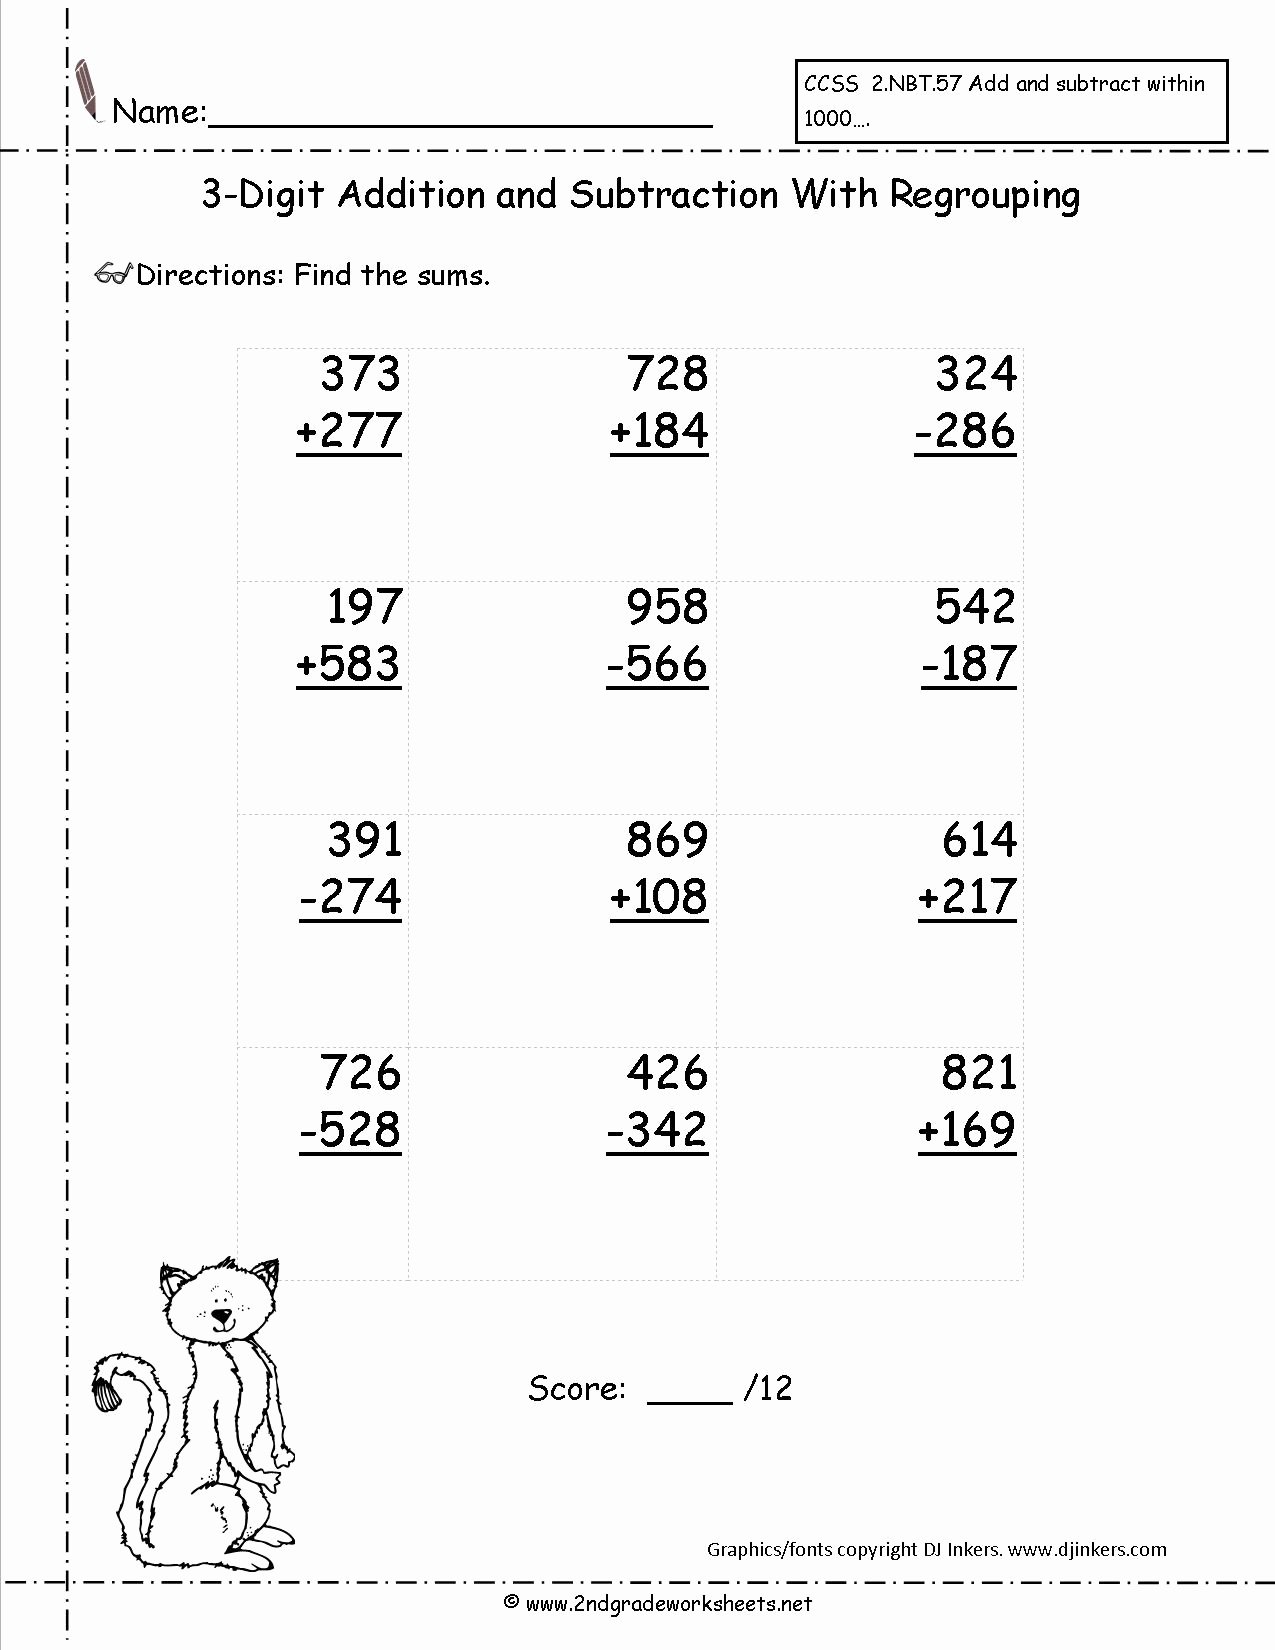 Math Addition and Subtraction Worksheets Beautiful Free Math Printouts From the Teacher S Guide